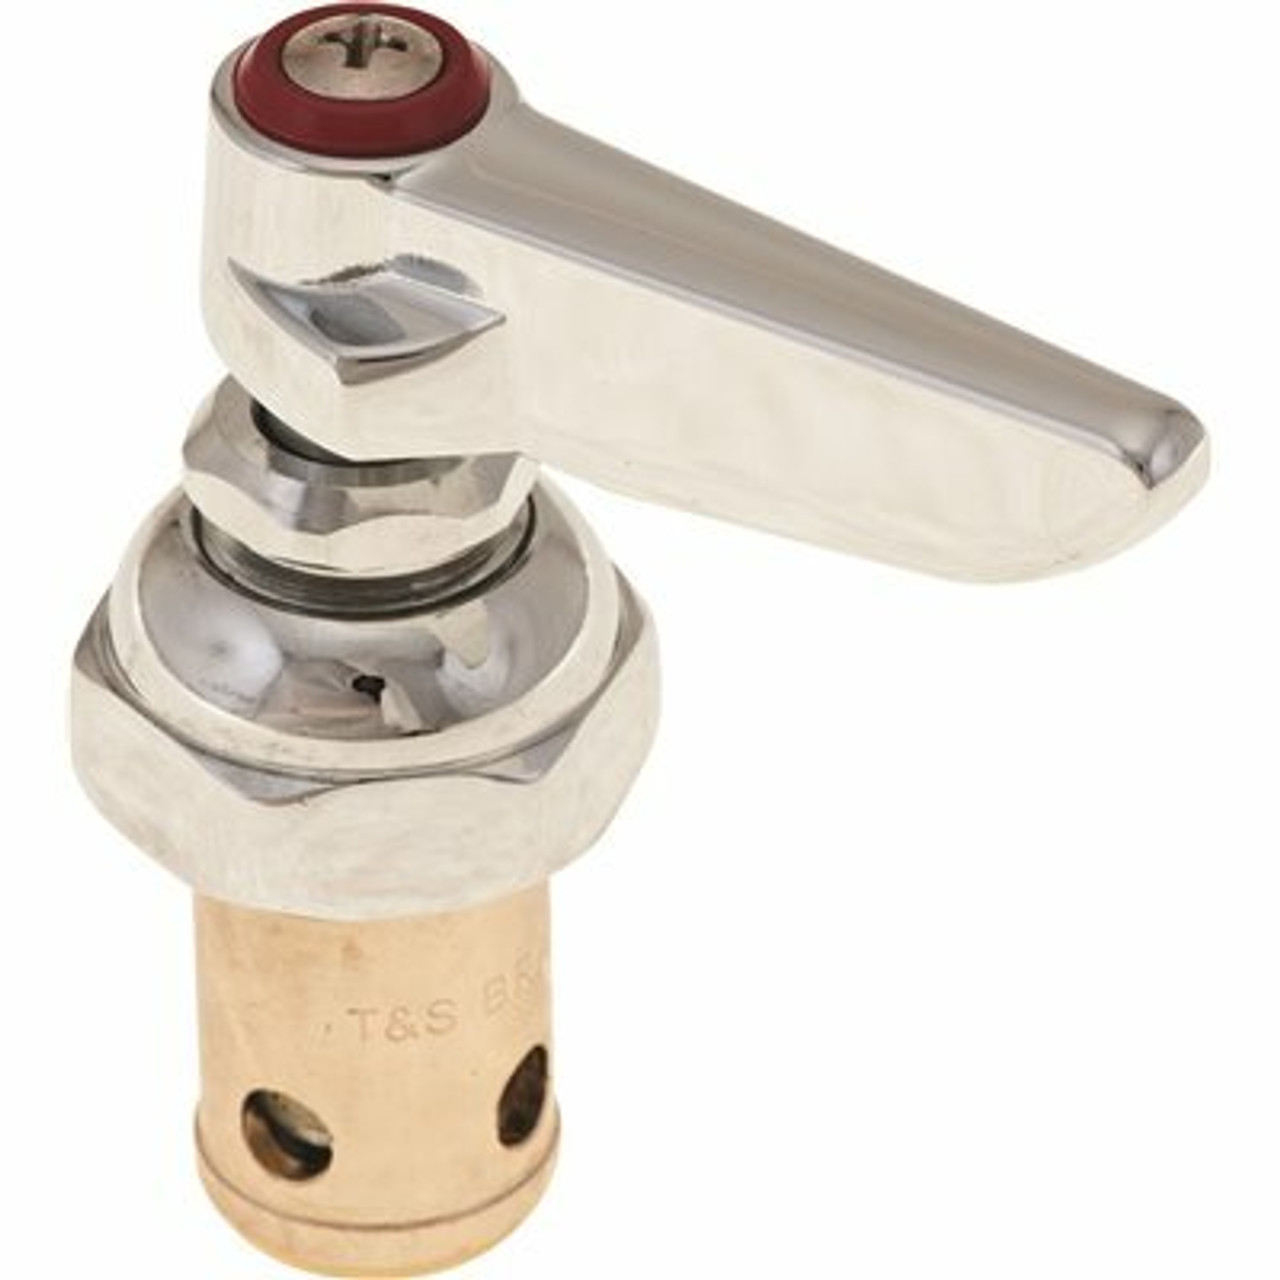 T&S Eterna Hot Spindle Assembly